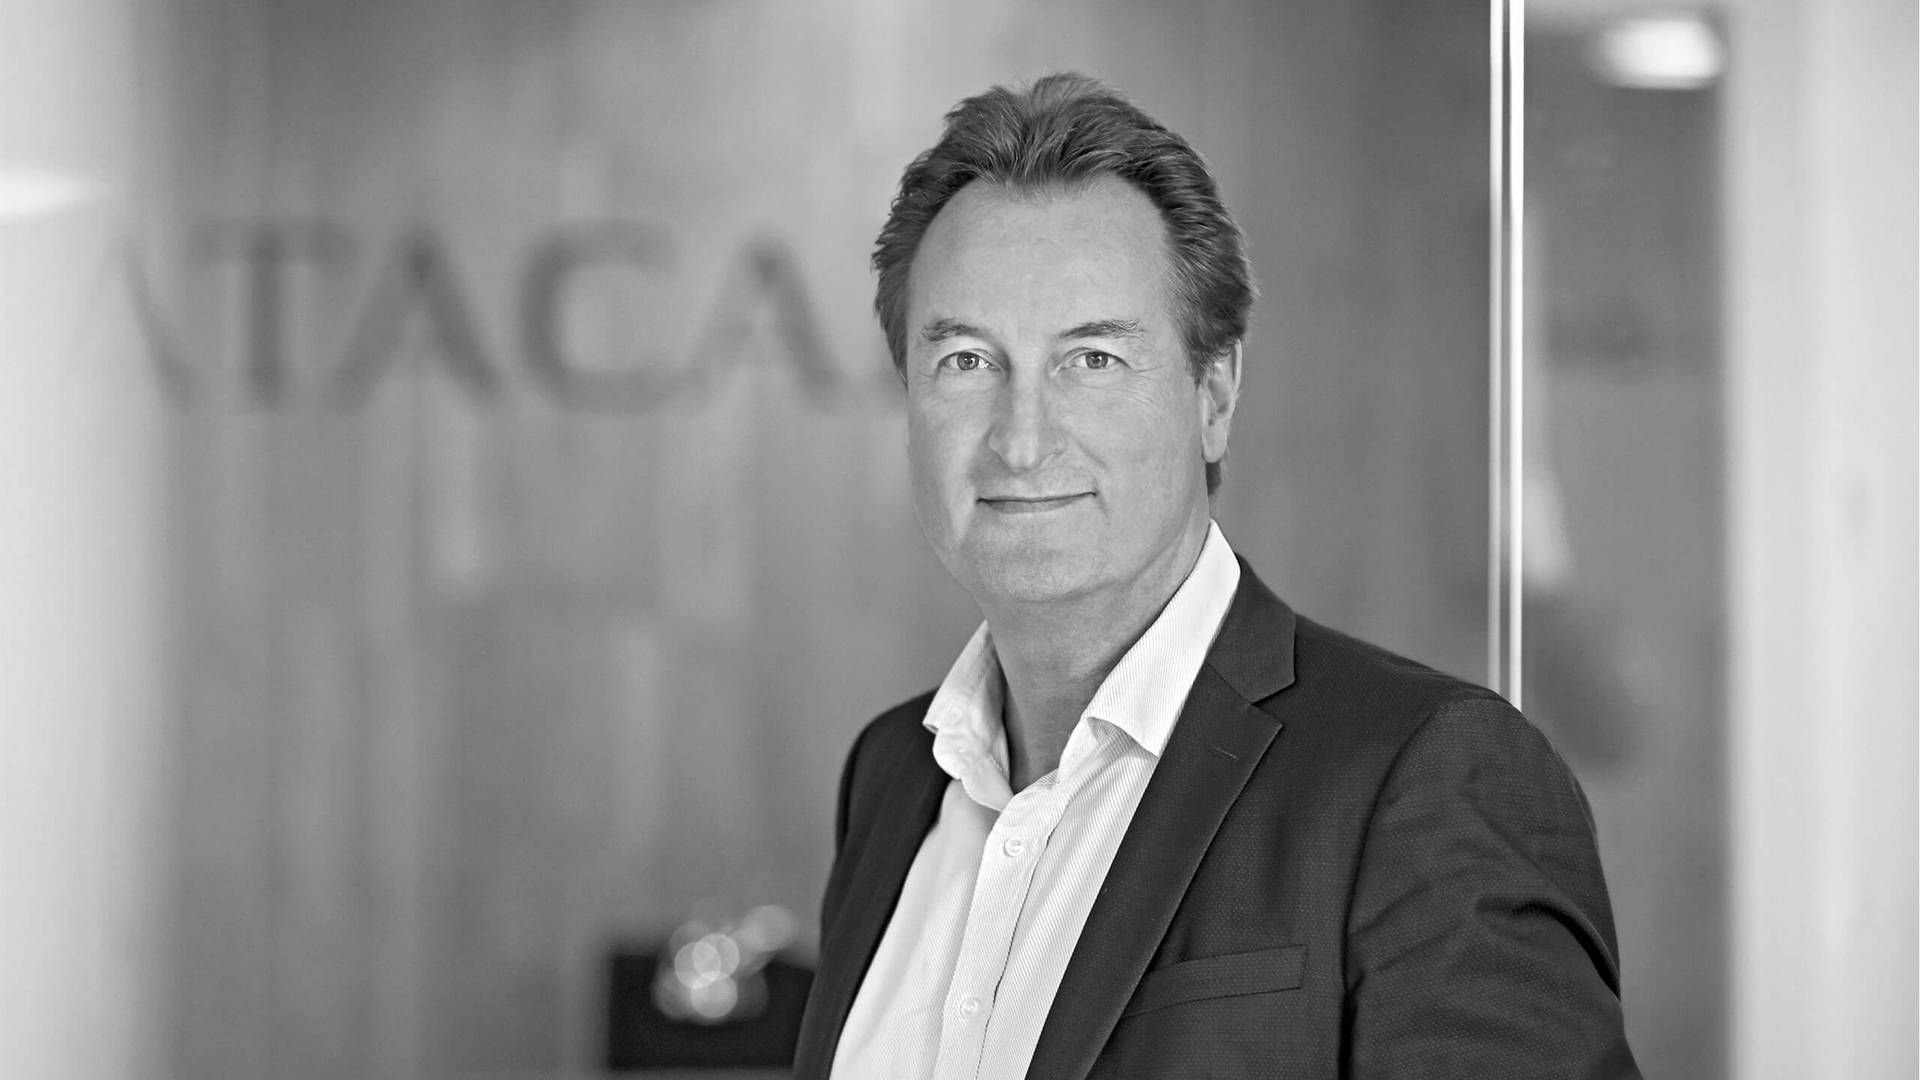 Vilhelm Hahn-Petersen, co-founder and partner at Catacap, which is currently raising capital for its third fund. | Photo: Catacap / PR